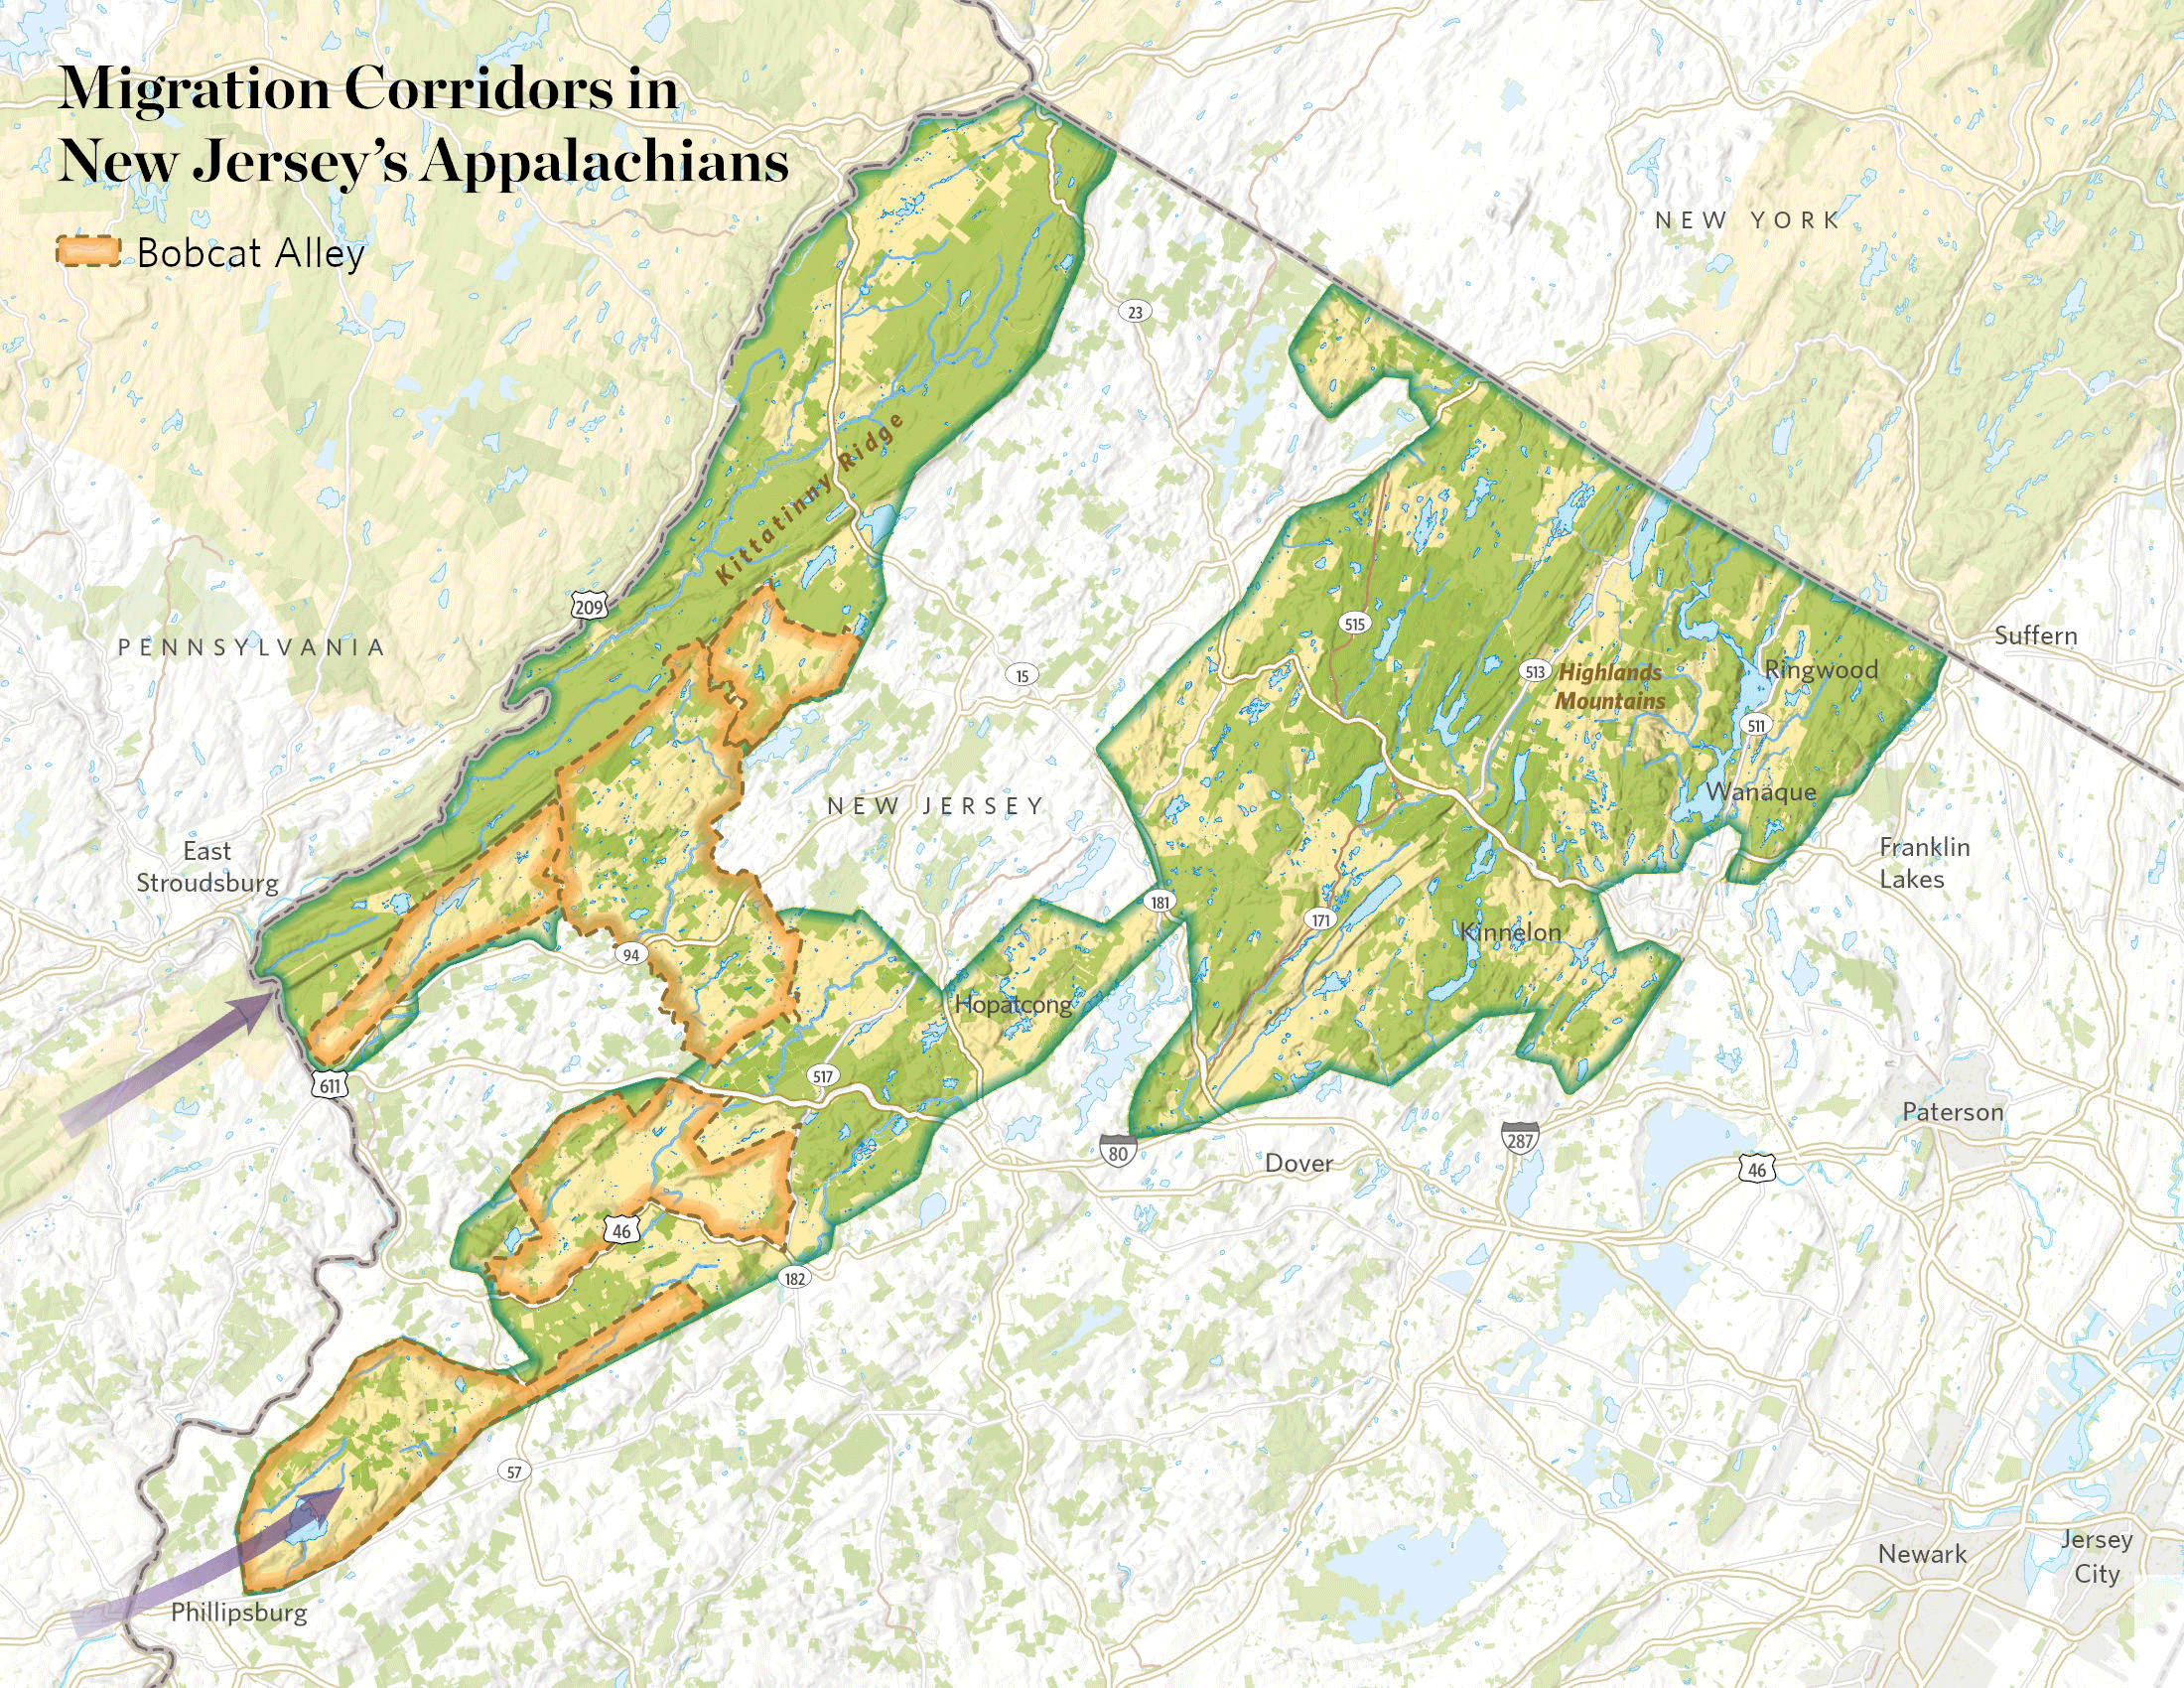 Animated gif showing migration routes in New Jersey Appalachians 